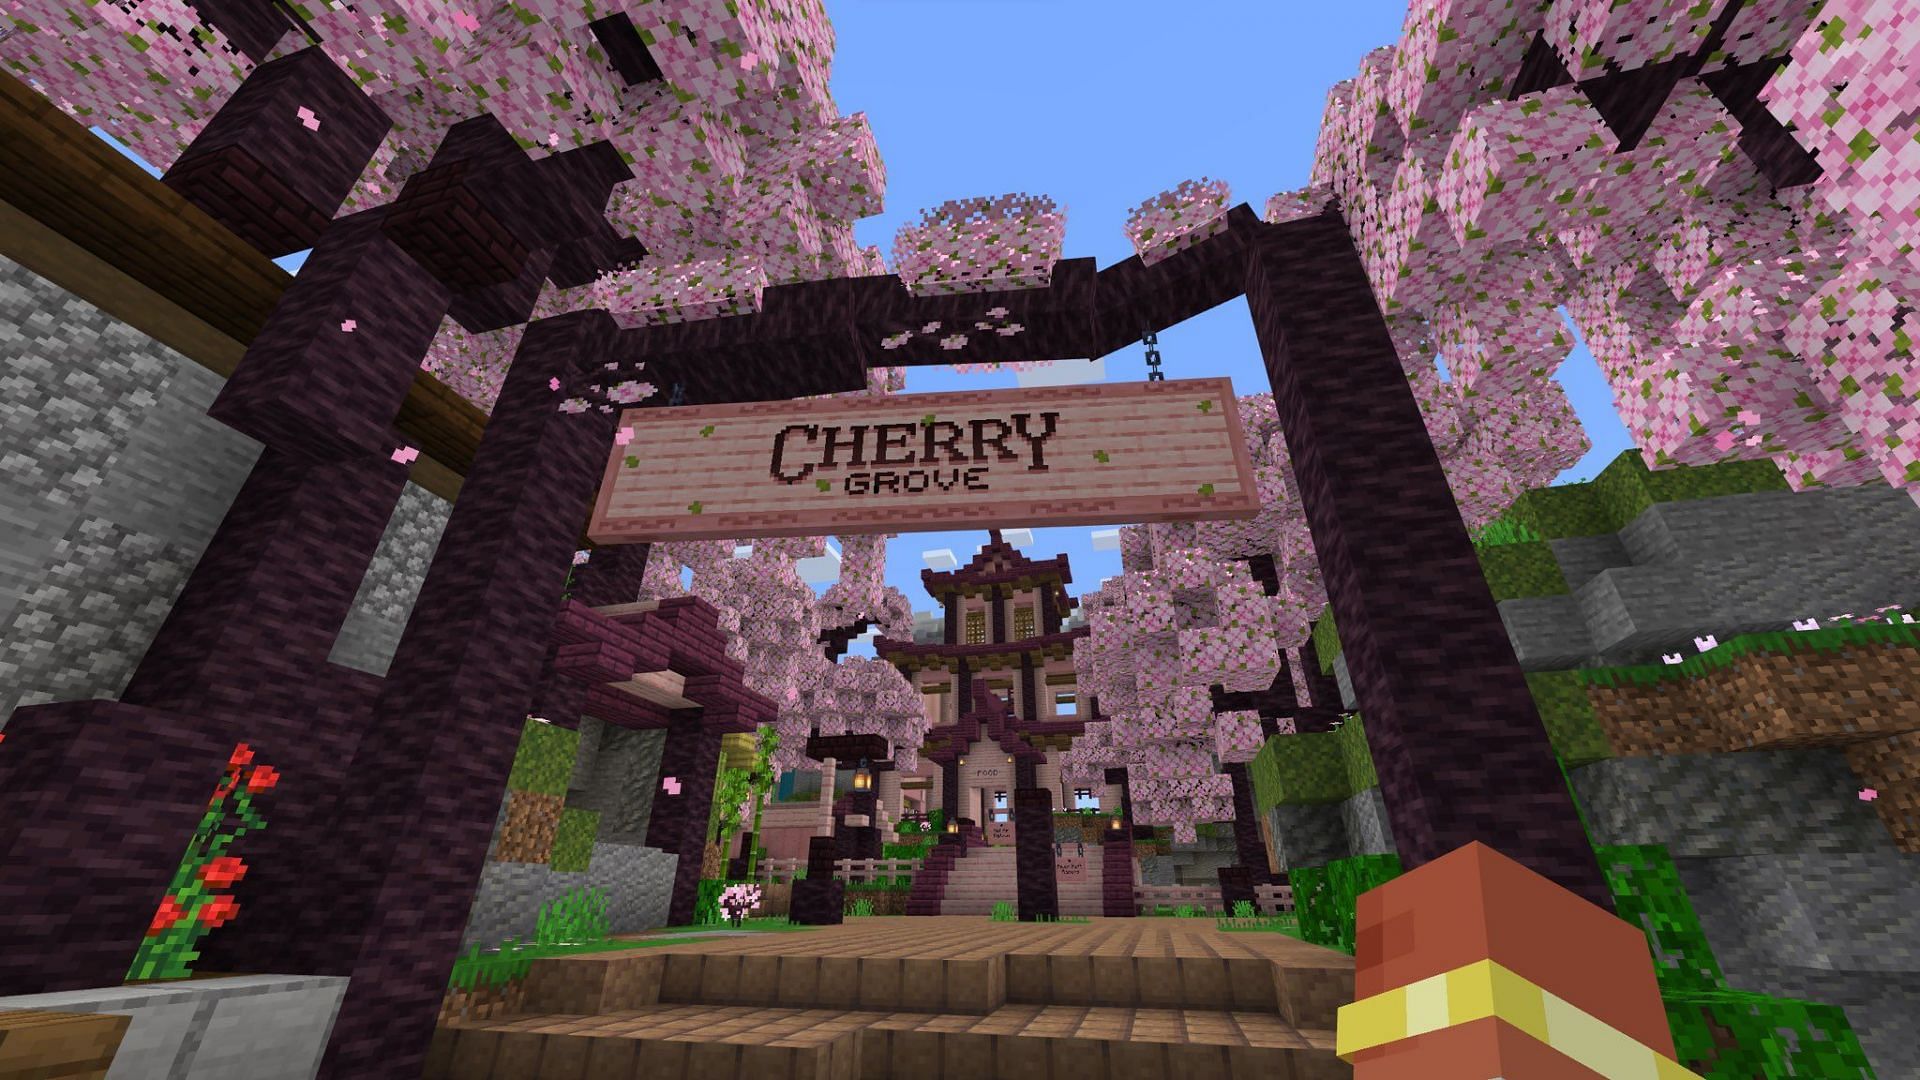 Easter Minigames in Minecraft Marketplace